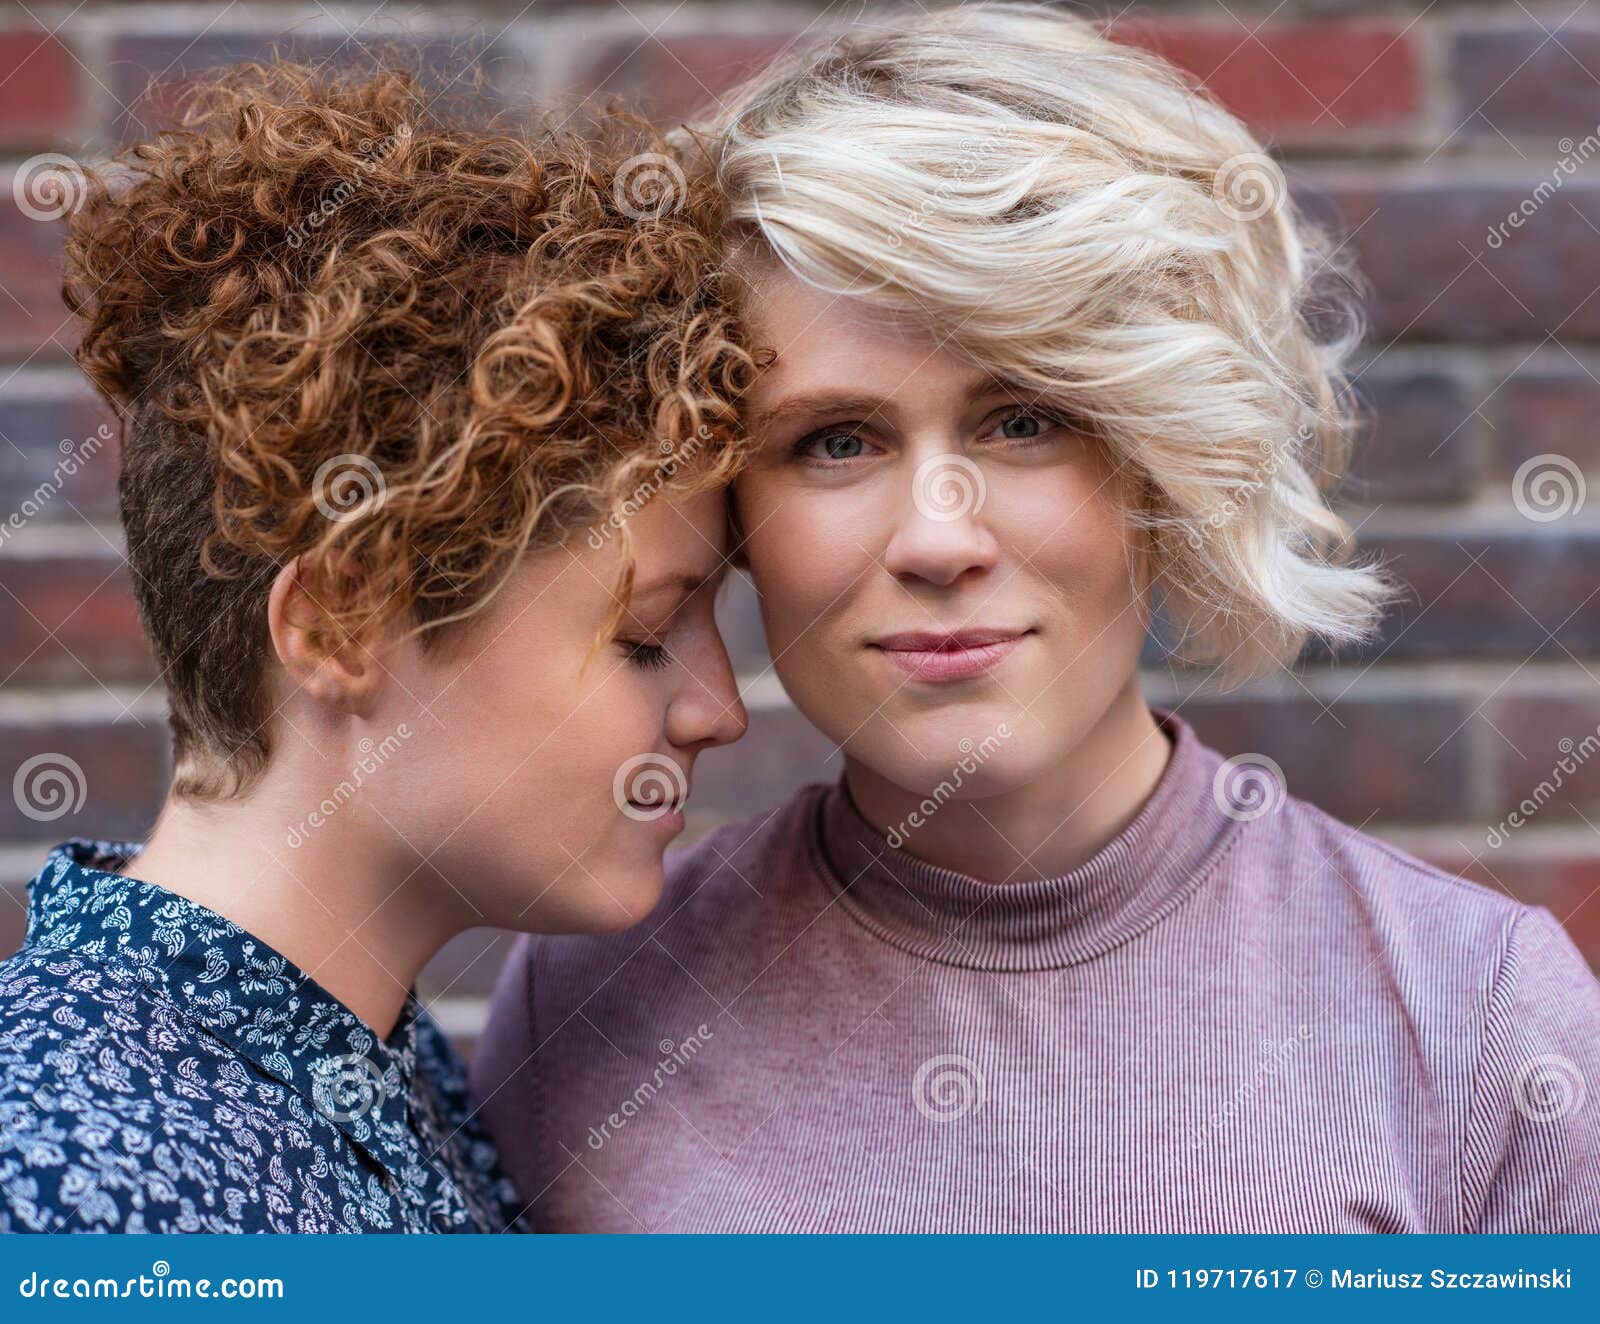 9. "Blonde lesbian wedding" - A search term for finding images and videos of lesbian weddings featuring brides with blonde hair. - wide 2